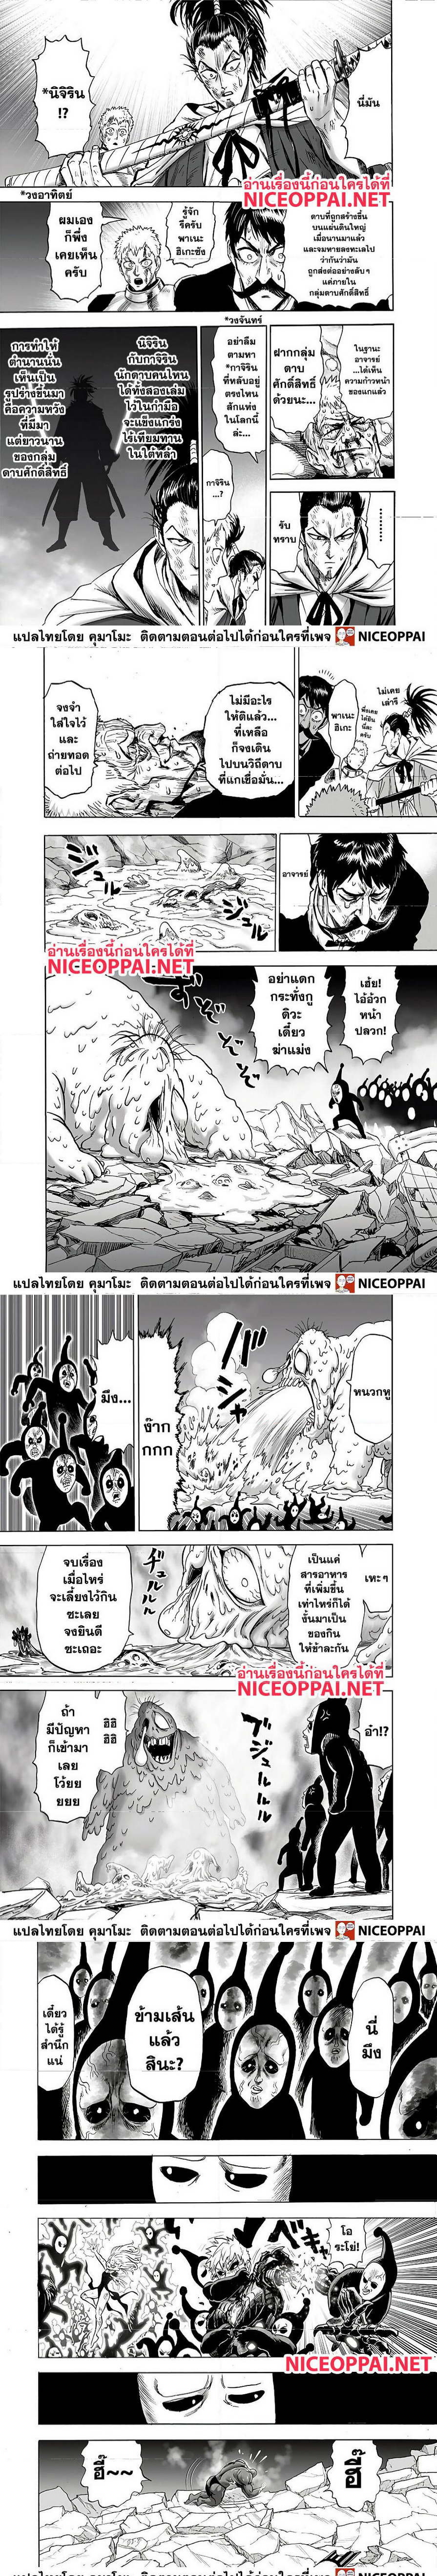 One Punch Man148 (6)